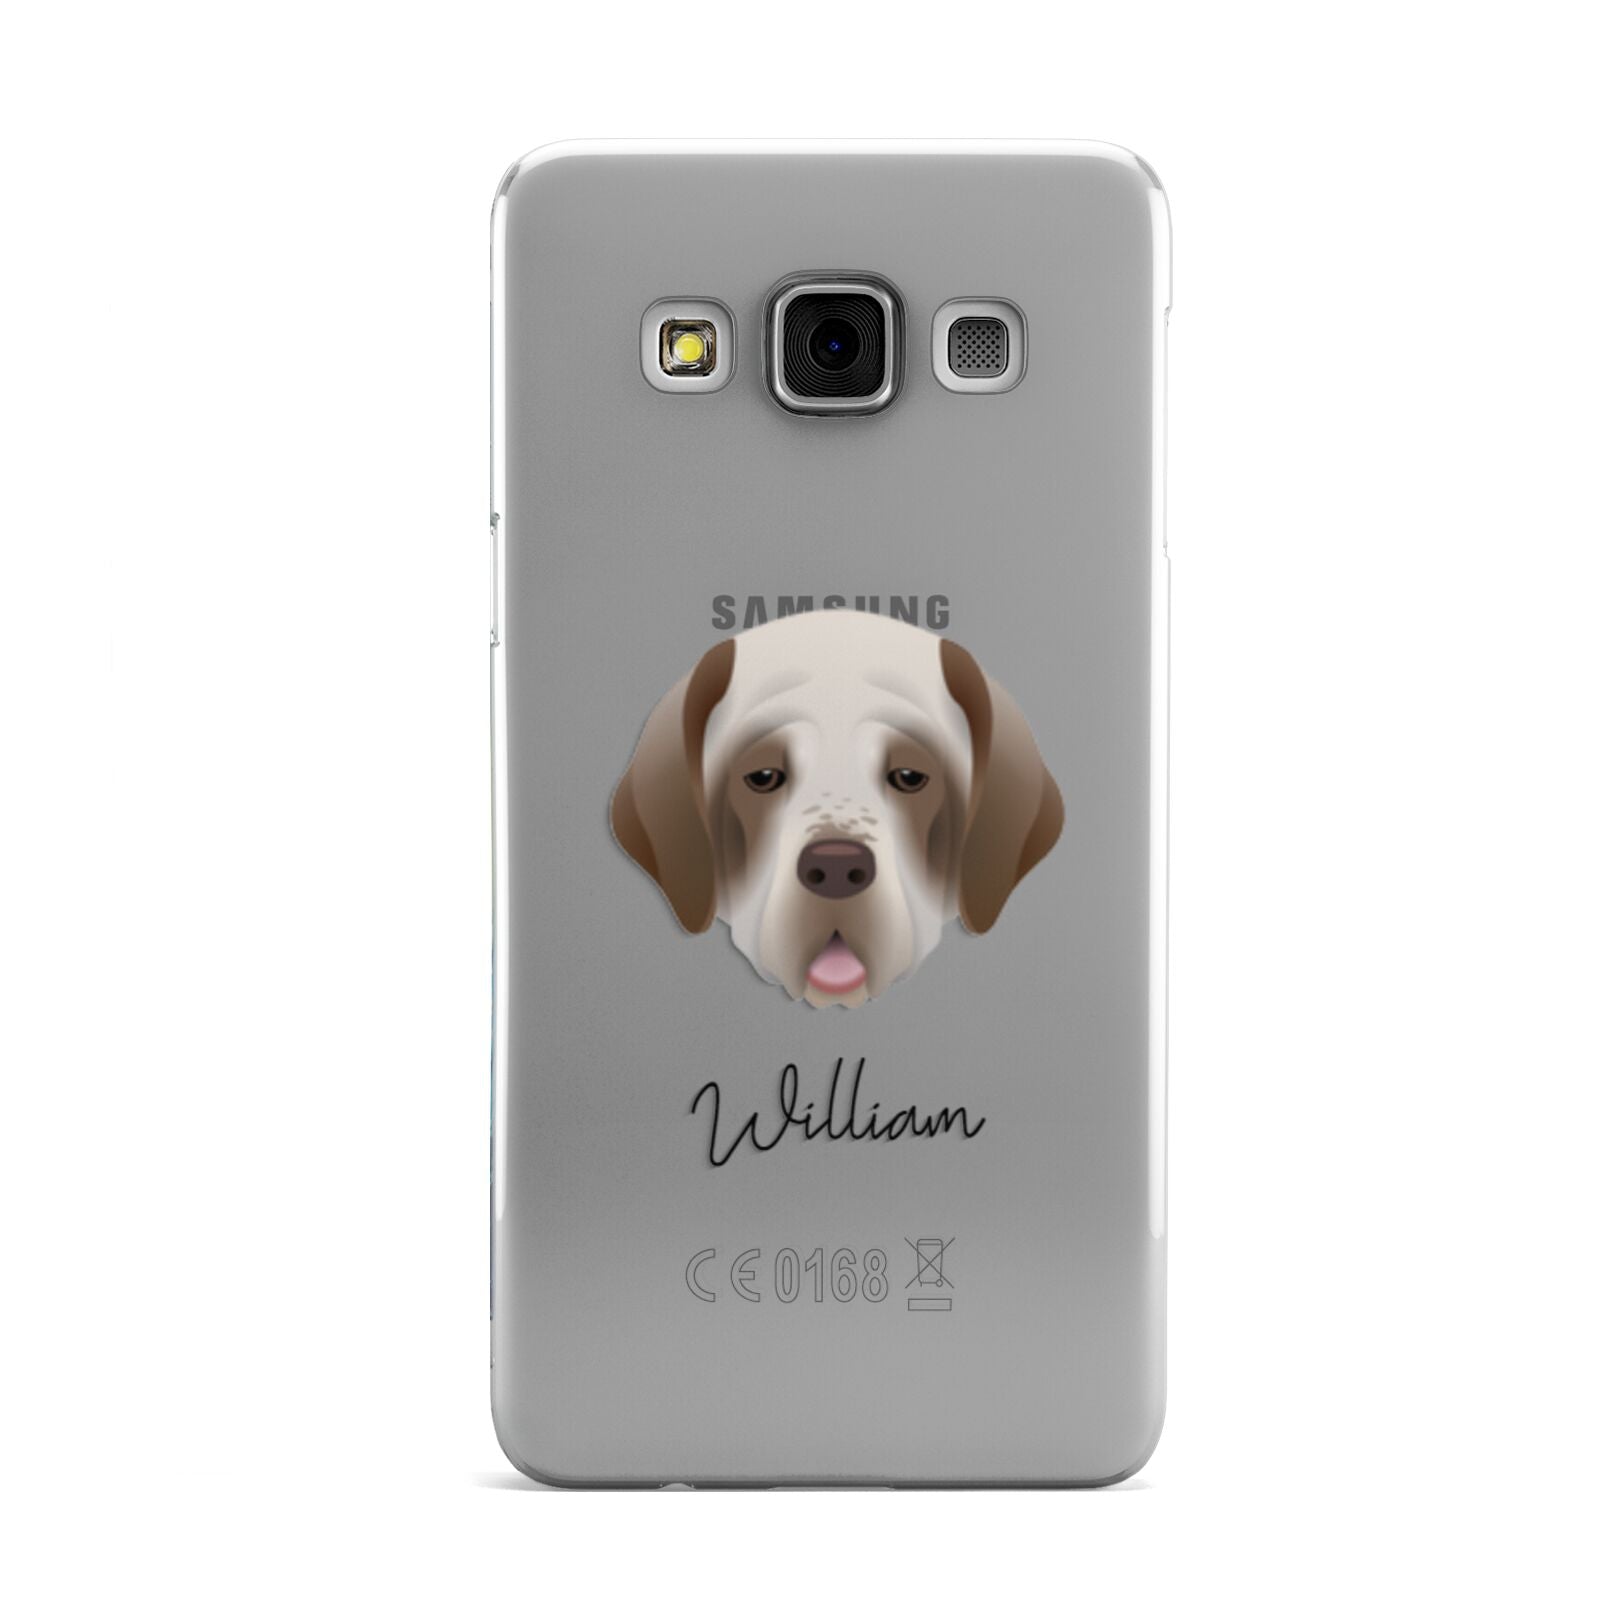 Clumber Spaniel Personalised Samsung Galaxy A3 Case